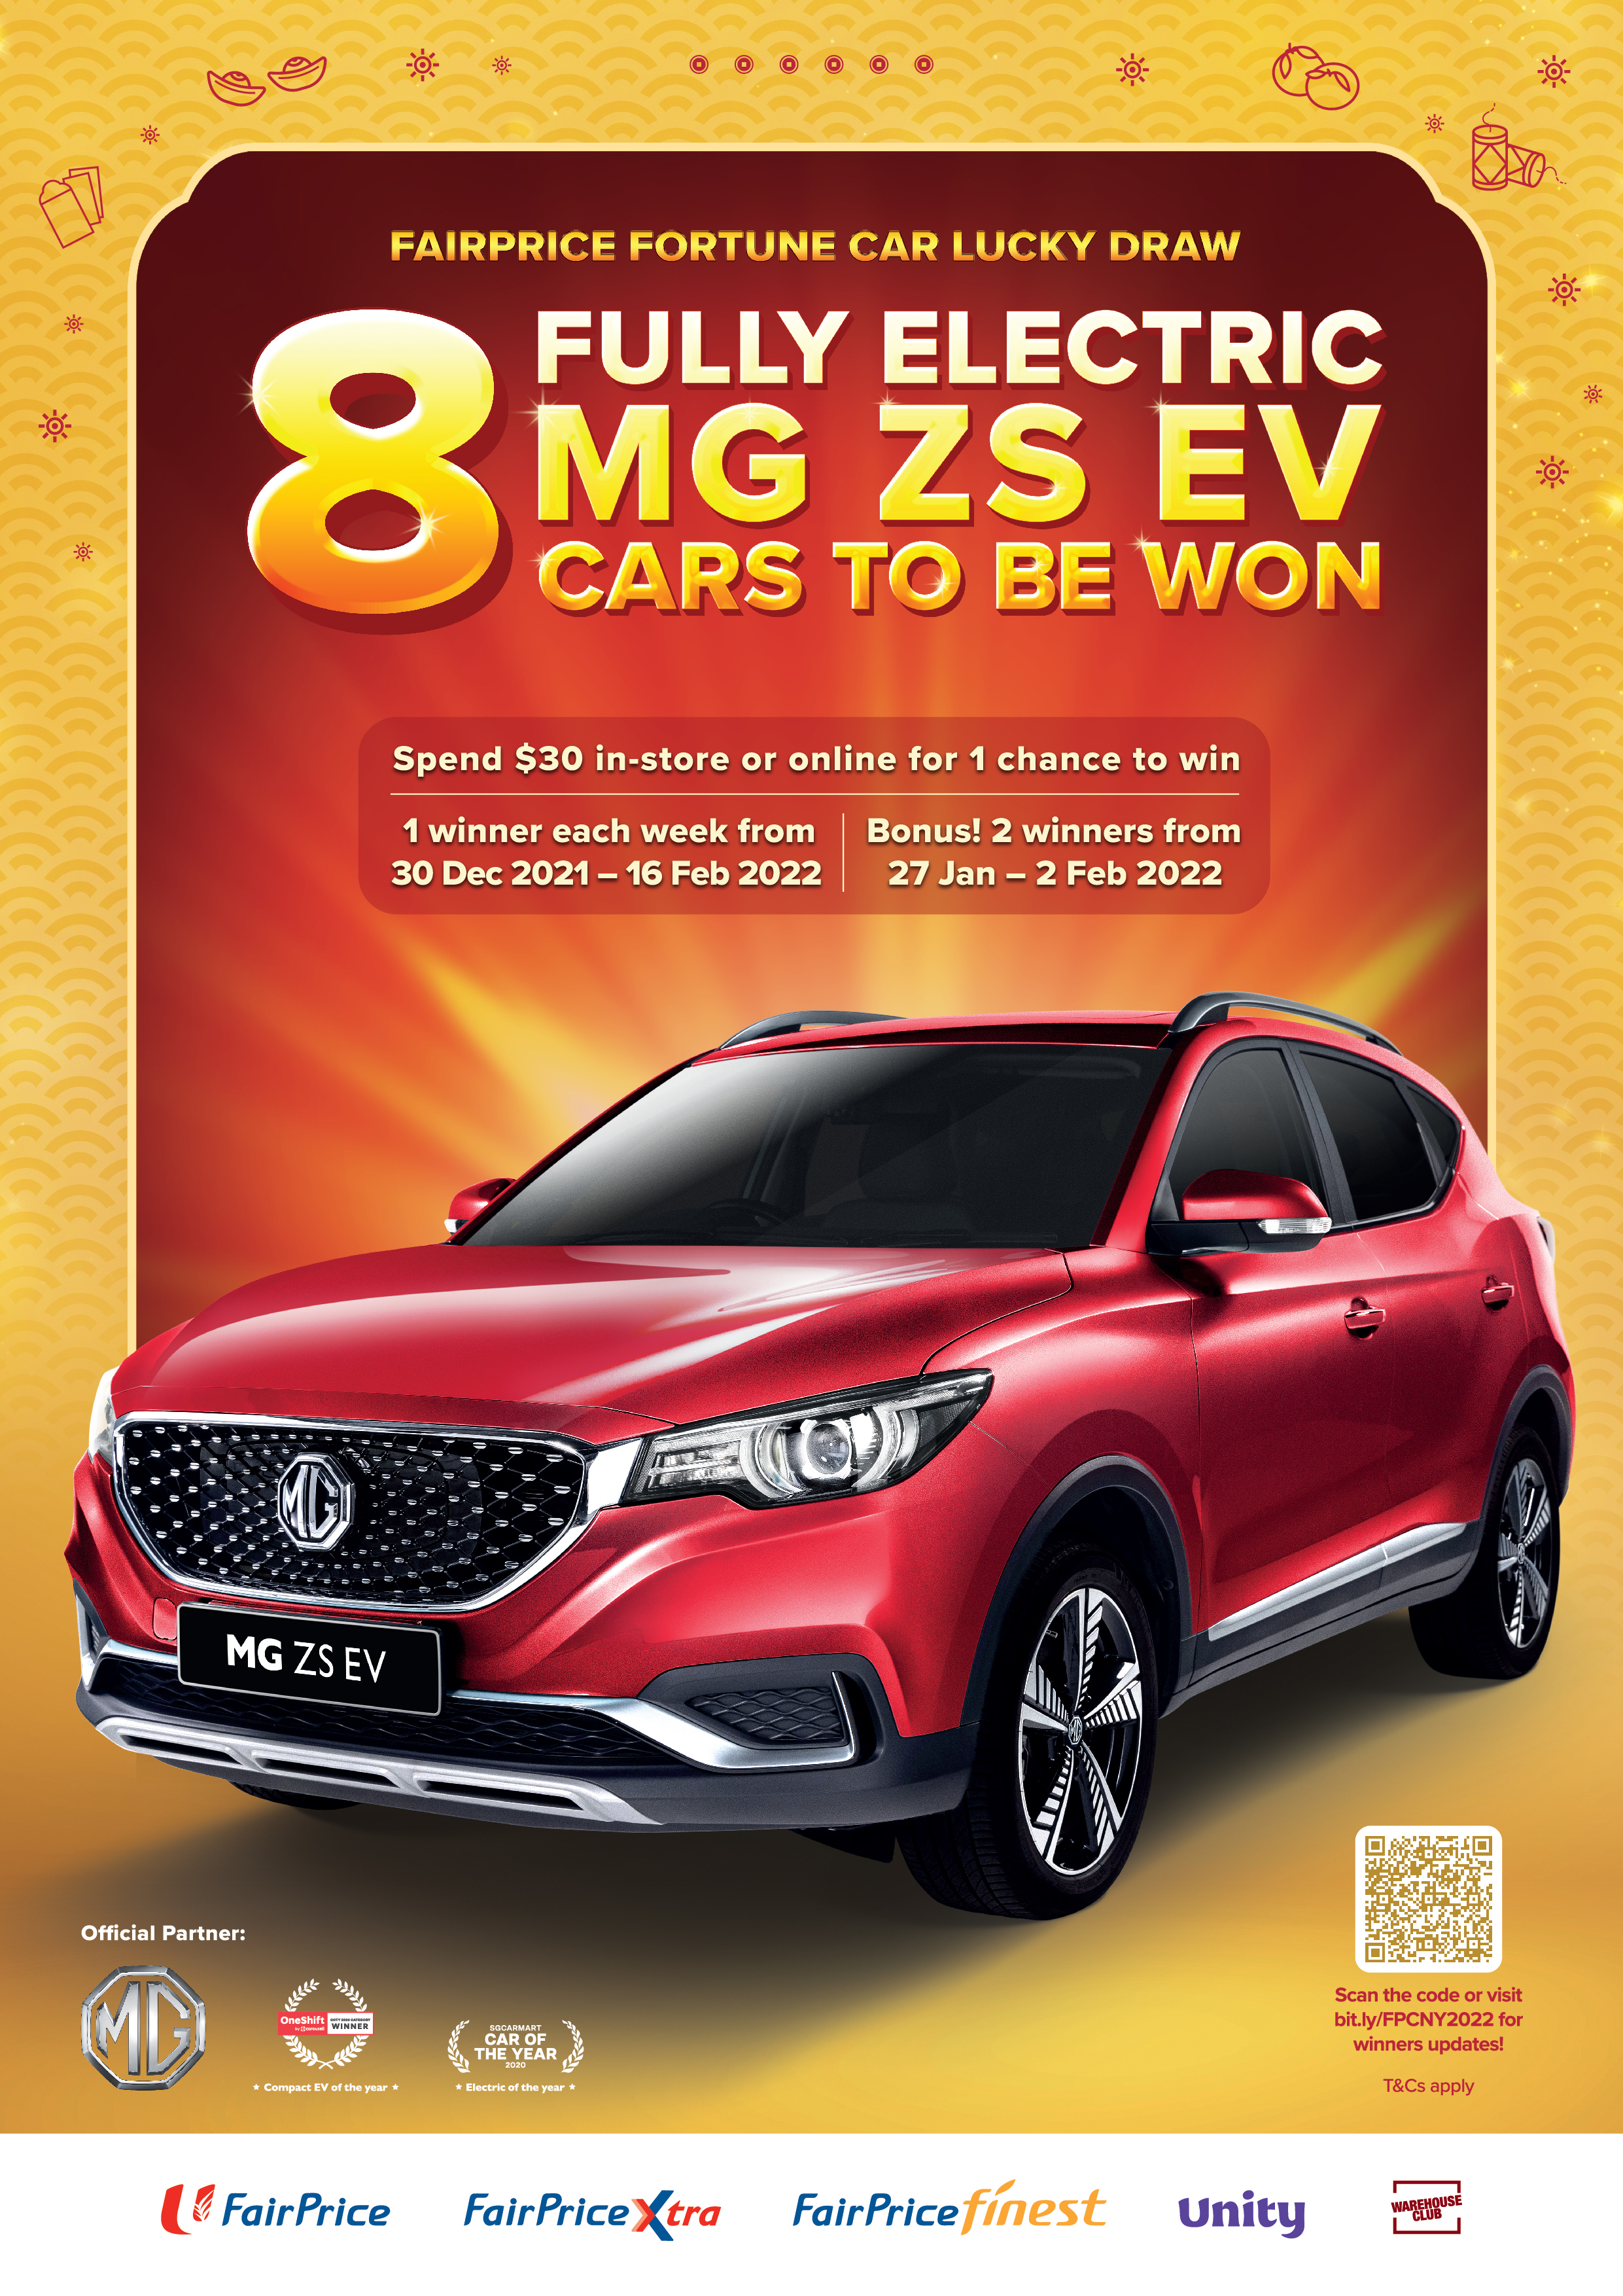 FairPrice is Giving Away 8 Fully Electric Cars From Now Till 16 Feb 2022! - 1